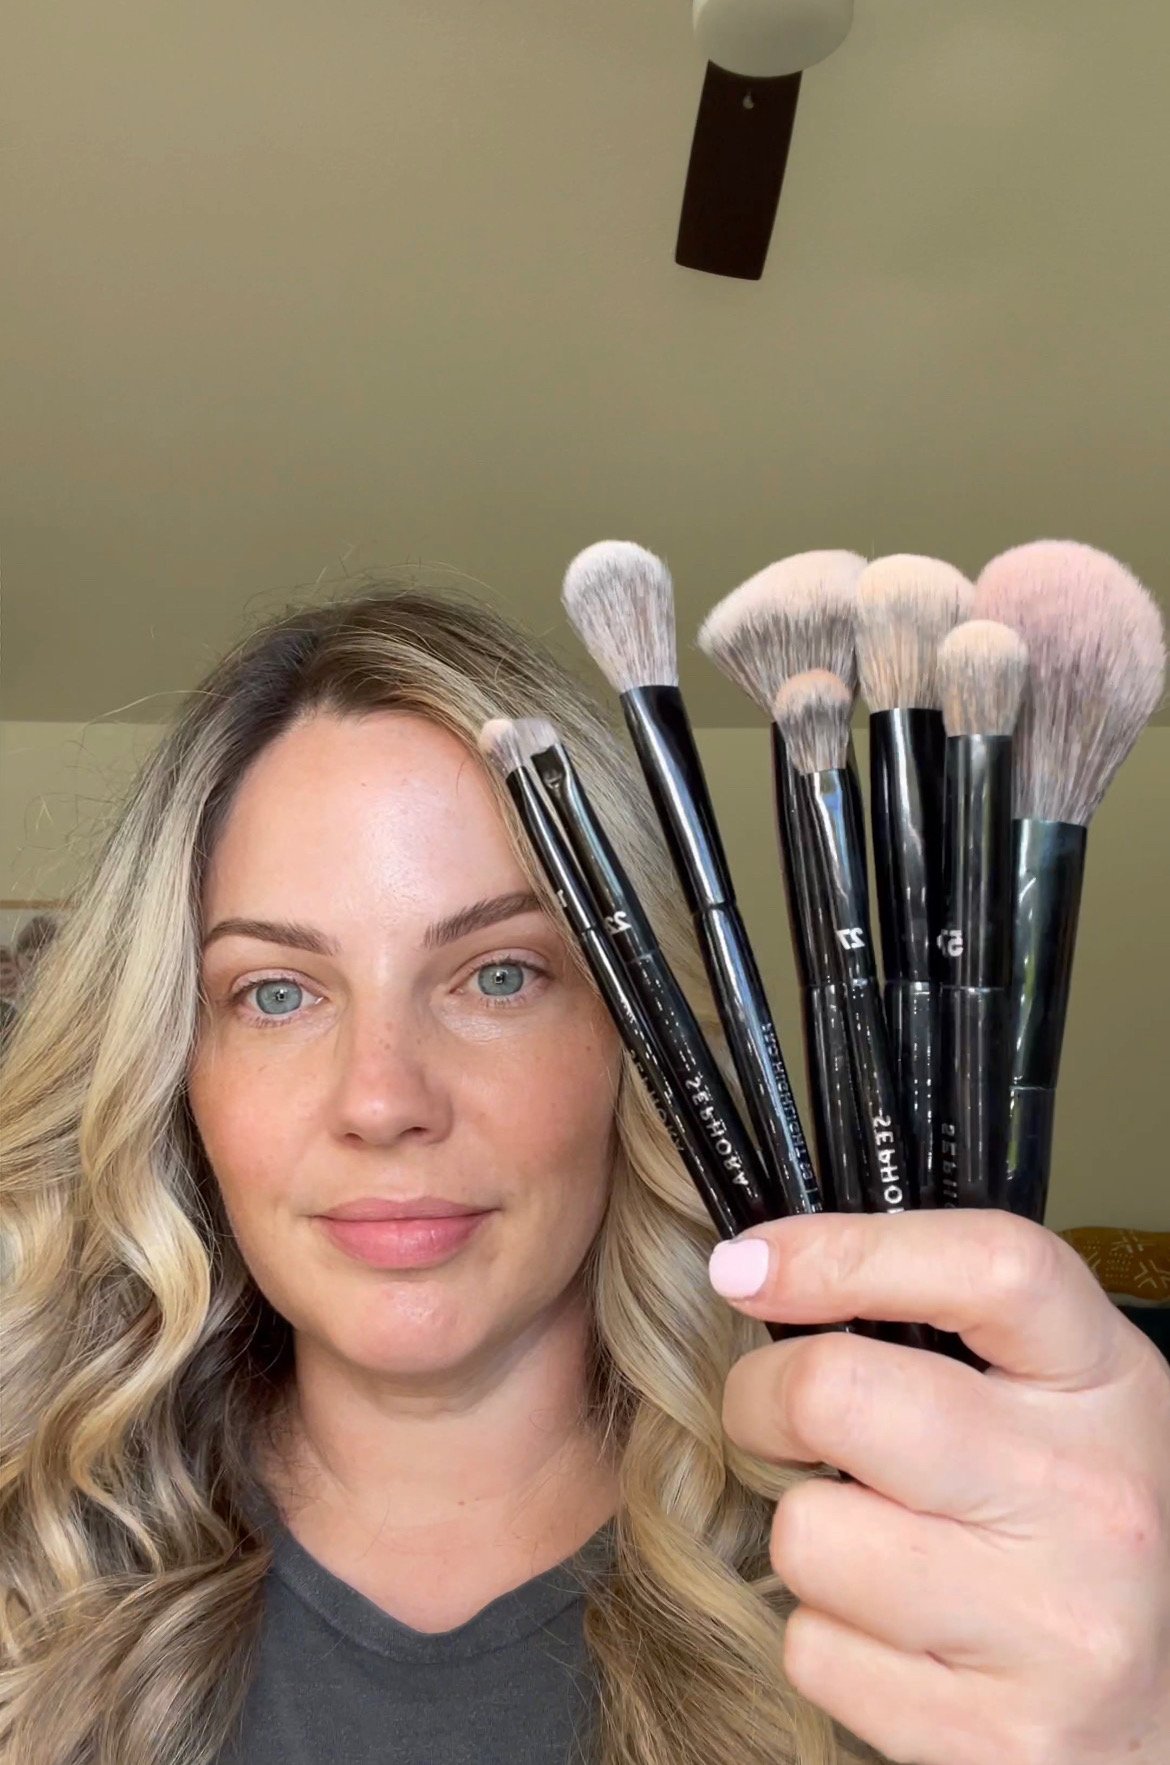 How to Properly Clean and Disinfect your Makeup Brushes